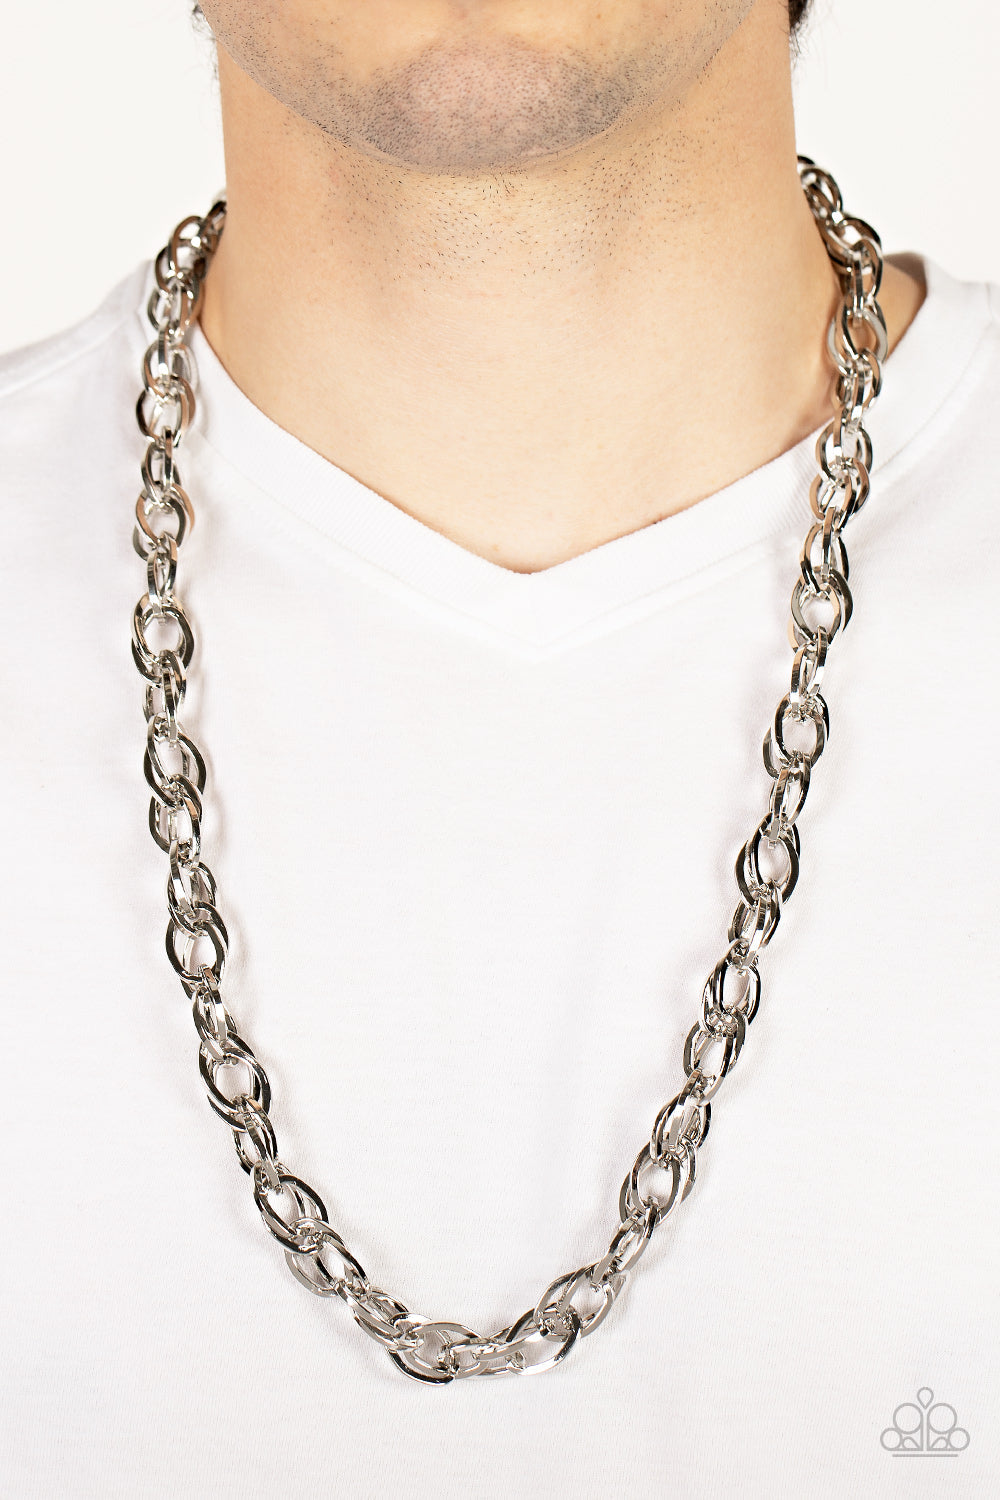 Custom Couture - Silver Oversized Oval Link Paparazzi Men's Necklace